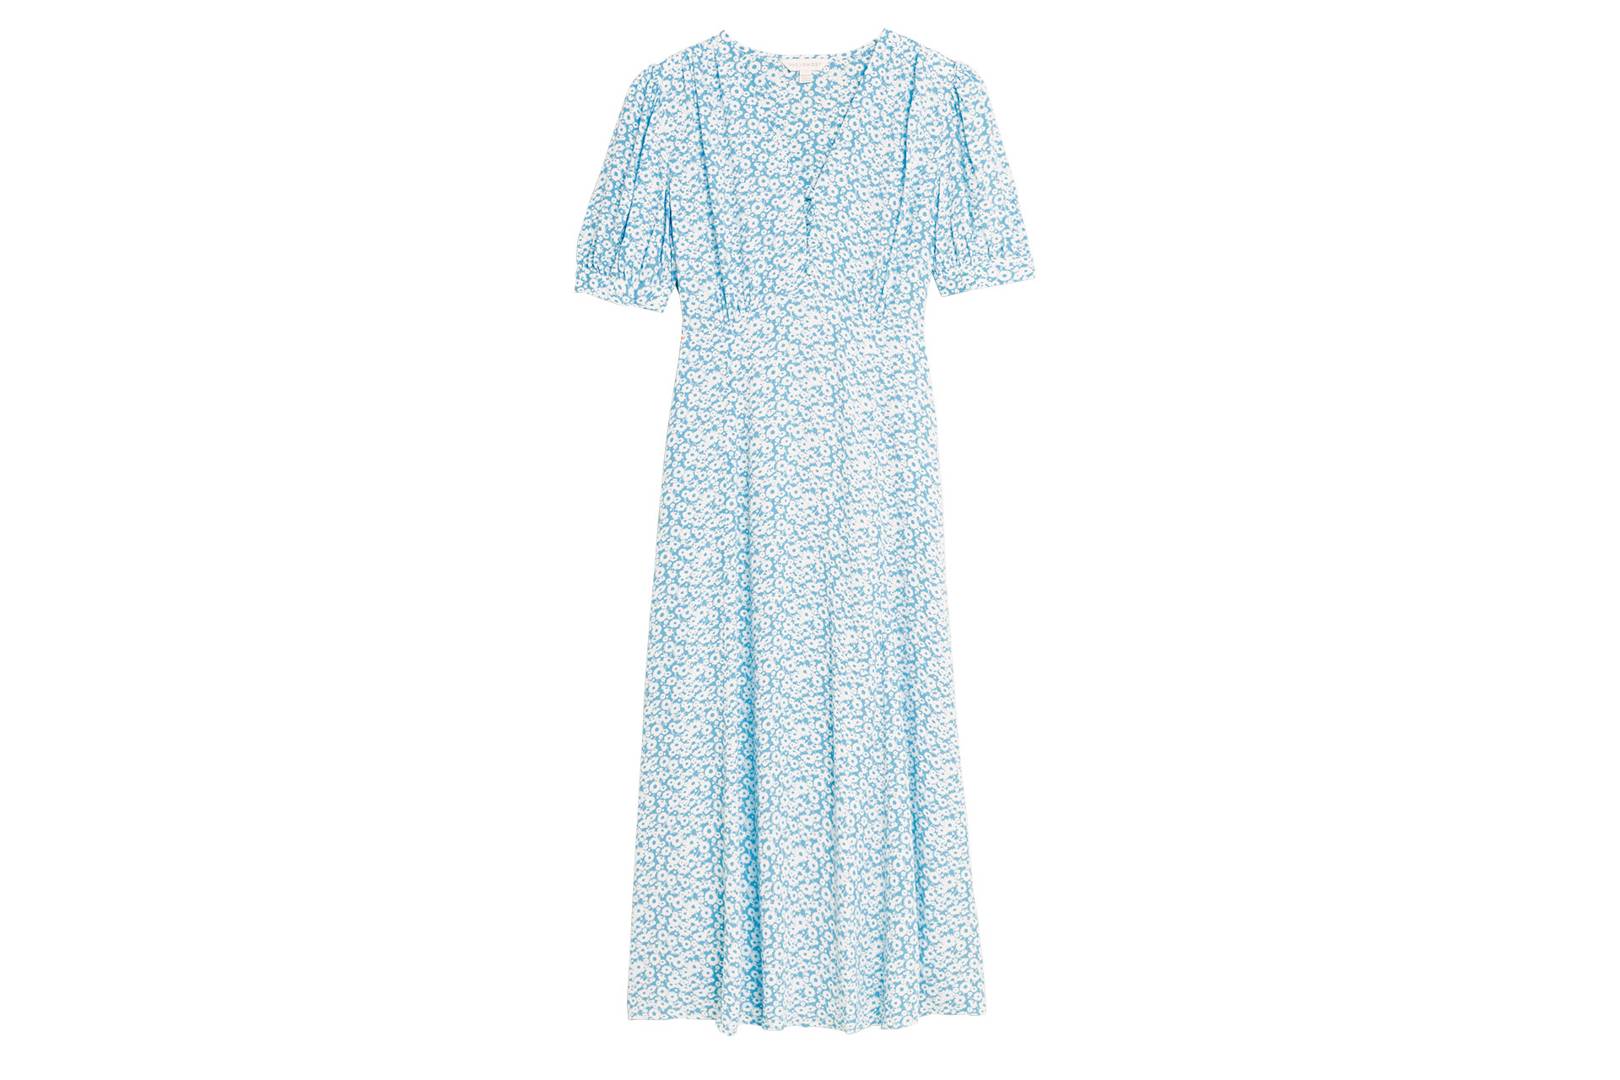 Marks & Spencer X Ghost: The 15 Beautiful Dresses | Glamour UK